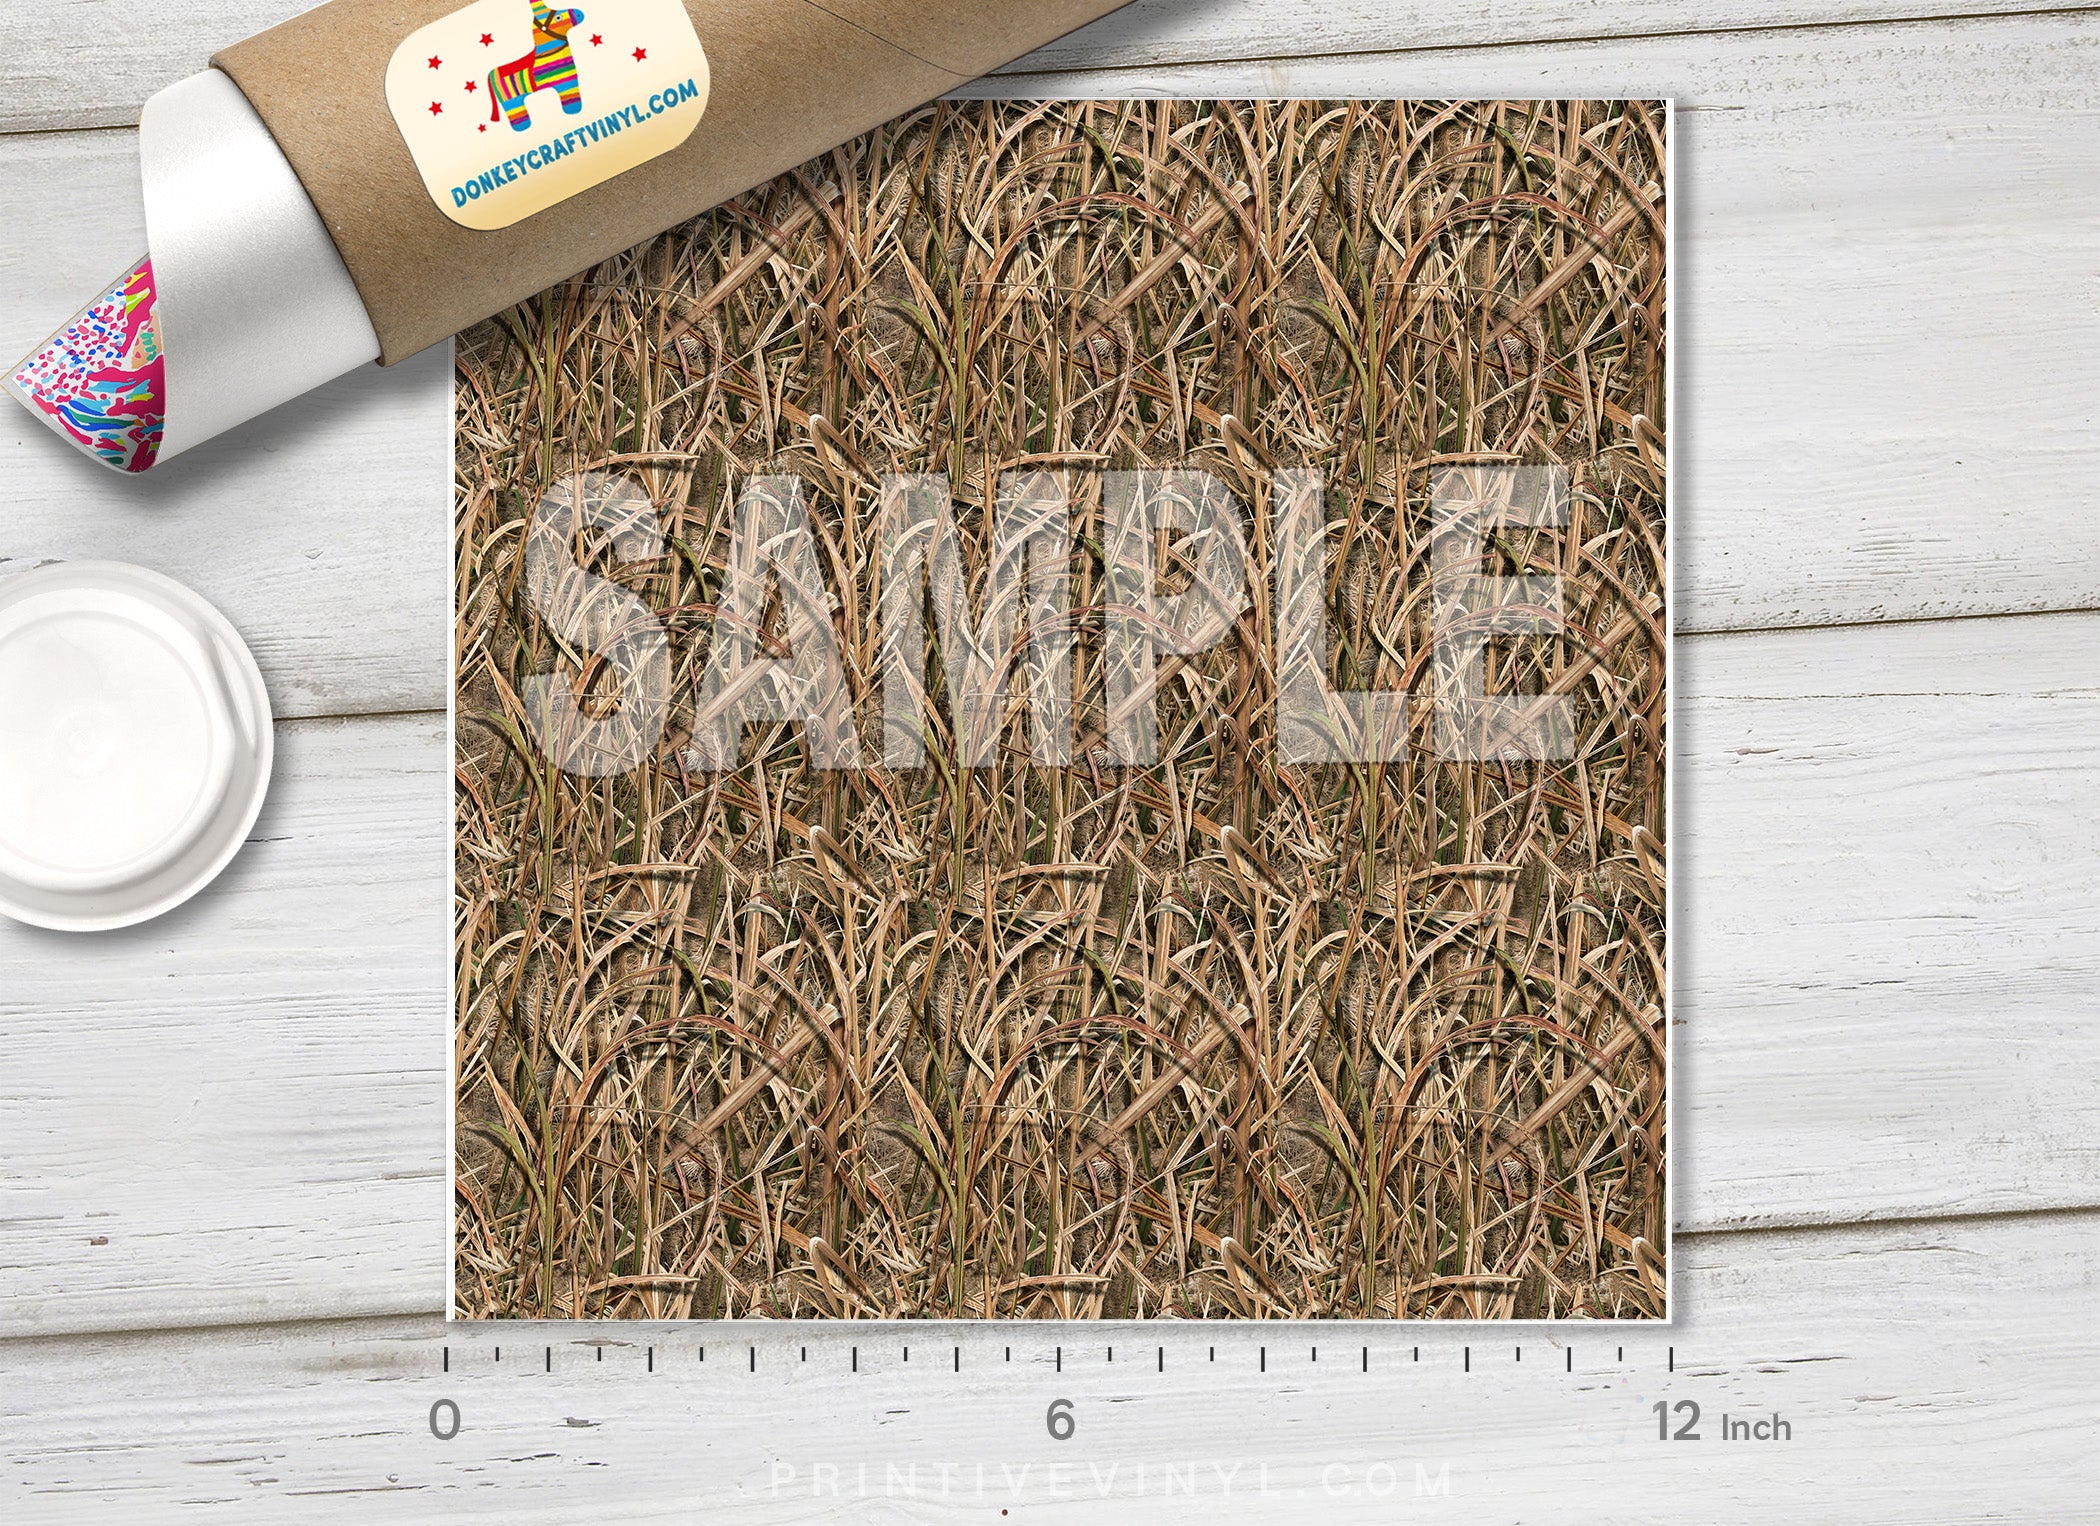 Grass Camouflage Patterned Adhesive Vinyl 706